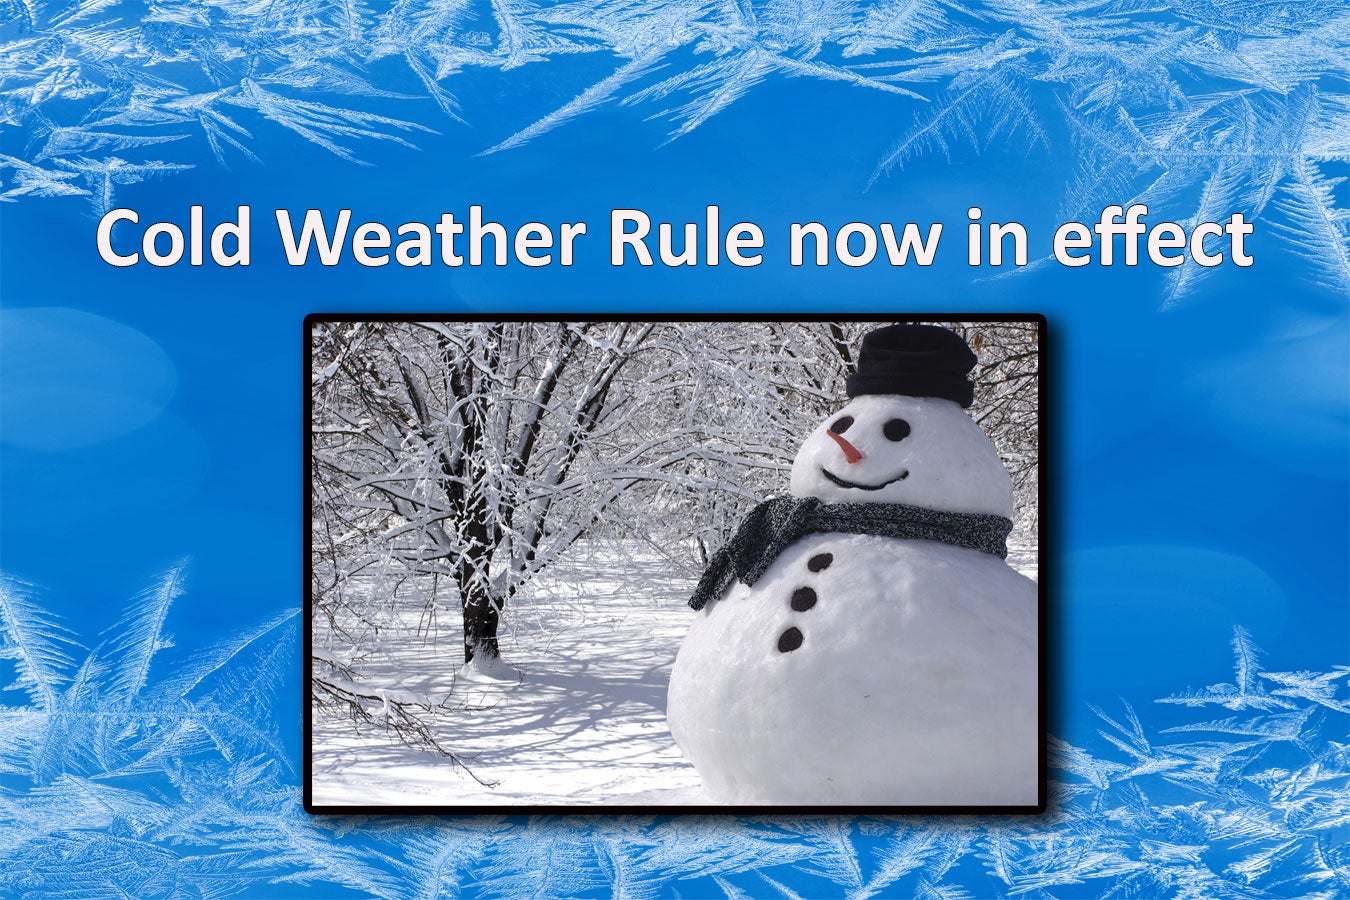 Cold weather rule graphic with snowman